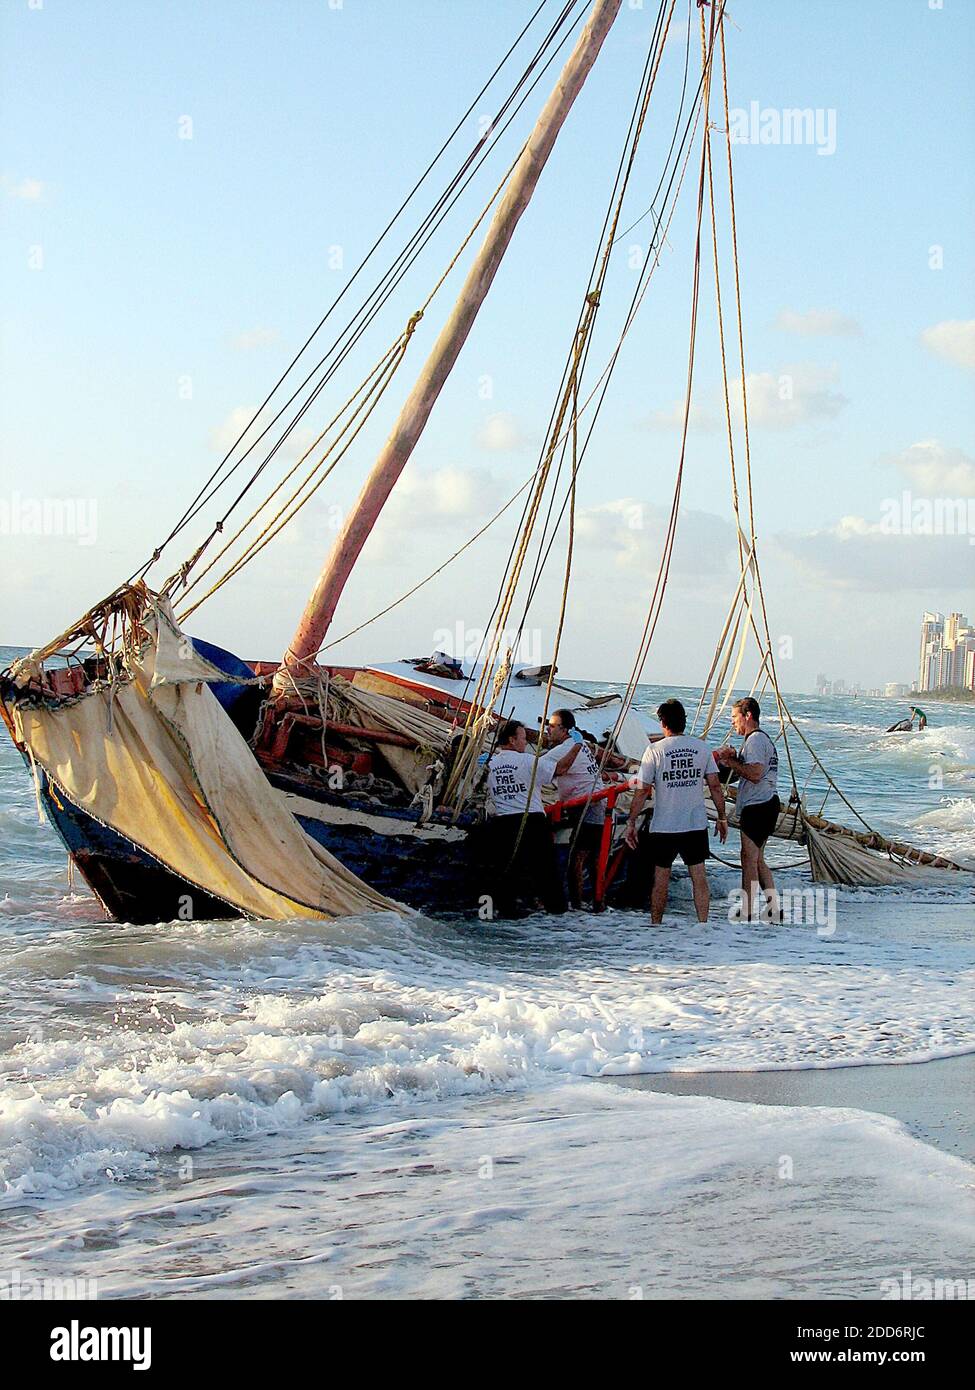 NO FILM, NO VIDEO, NO TV, NO DOCUMENTARY - More than 100 famished Haitian migrants slogged through waves and staggered ashore after their flimsy wooden sailboat ran aground in Hallandale Beach, Florida, Wednesday, March 28, 2007. Photo by David Santiago/El Nuevo Herald/MCT/ABACAPRESS.COM Stock Photo